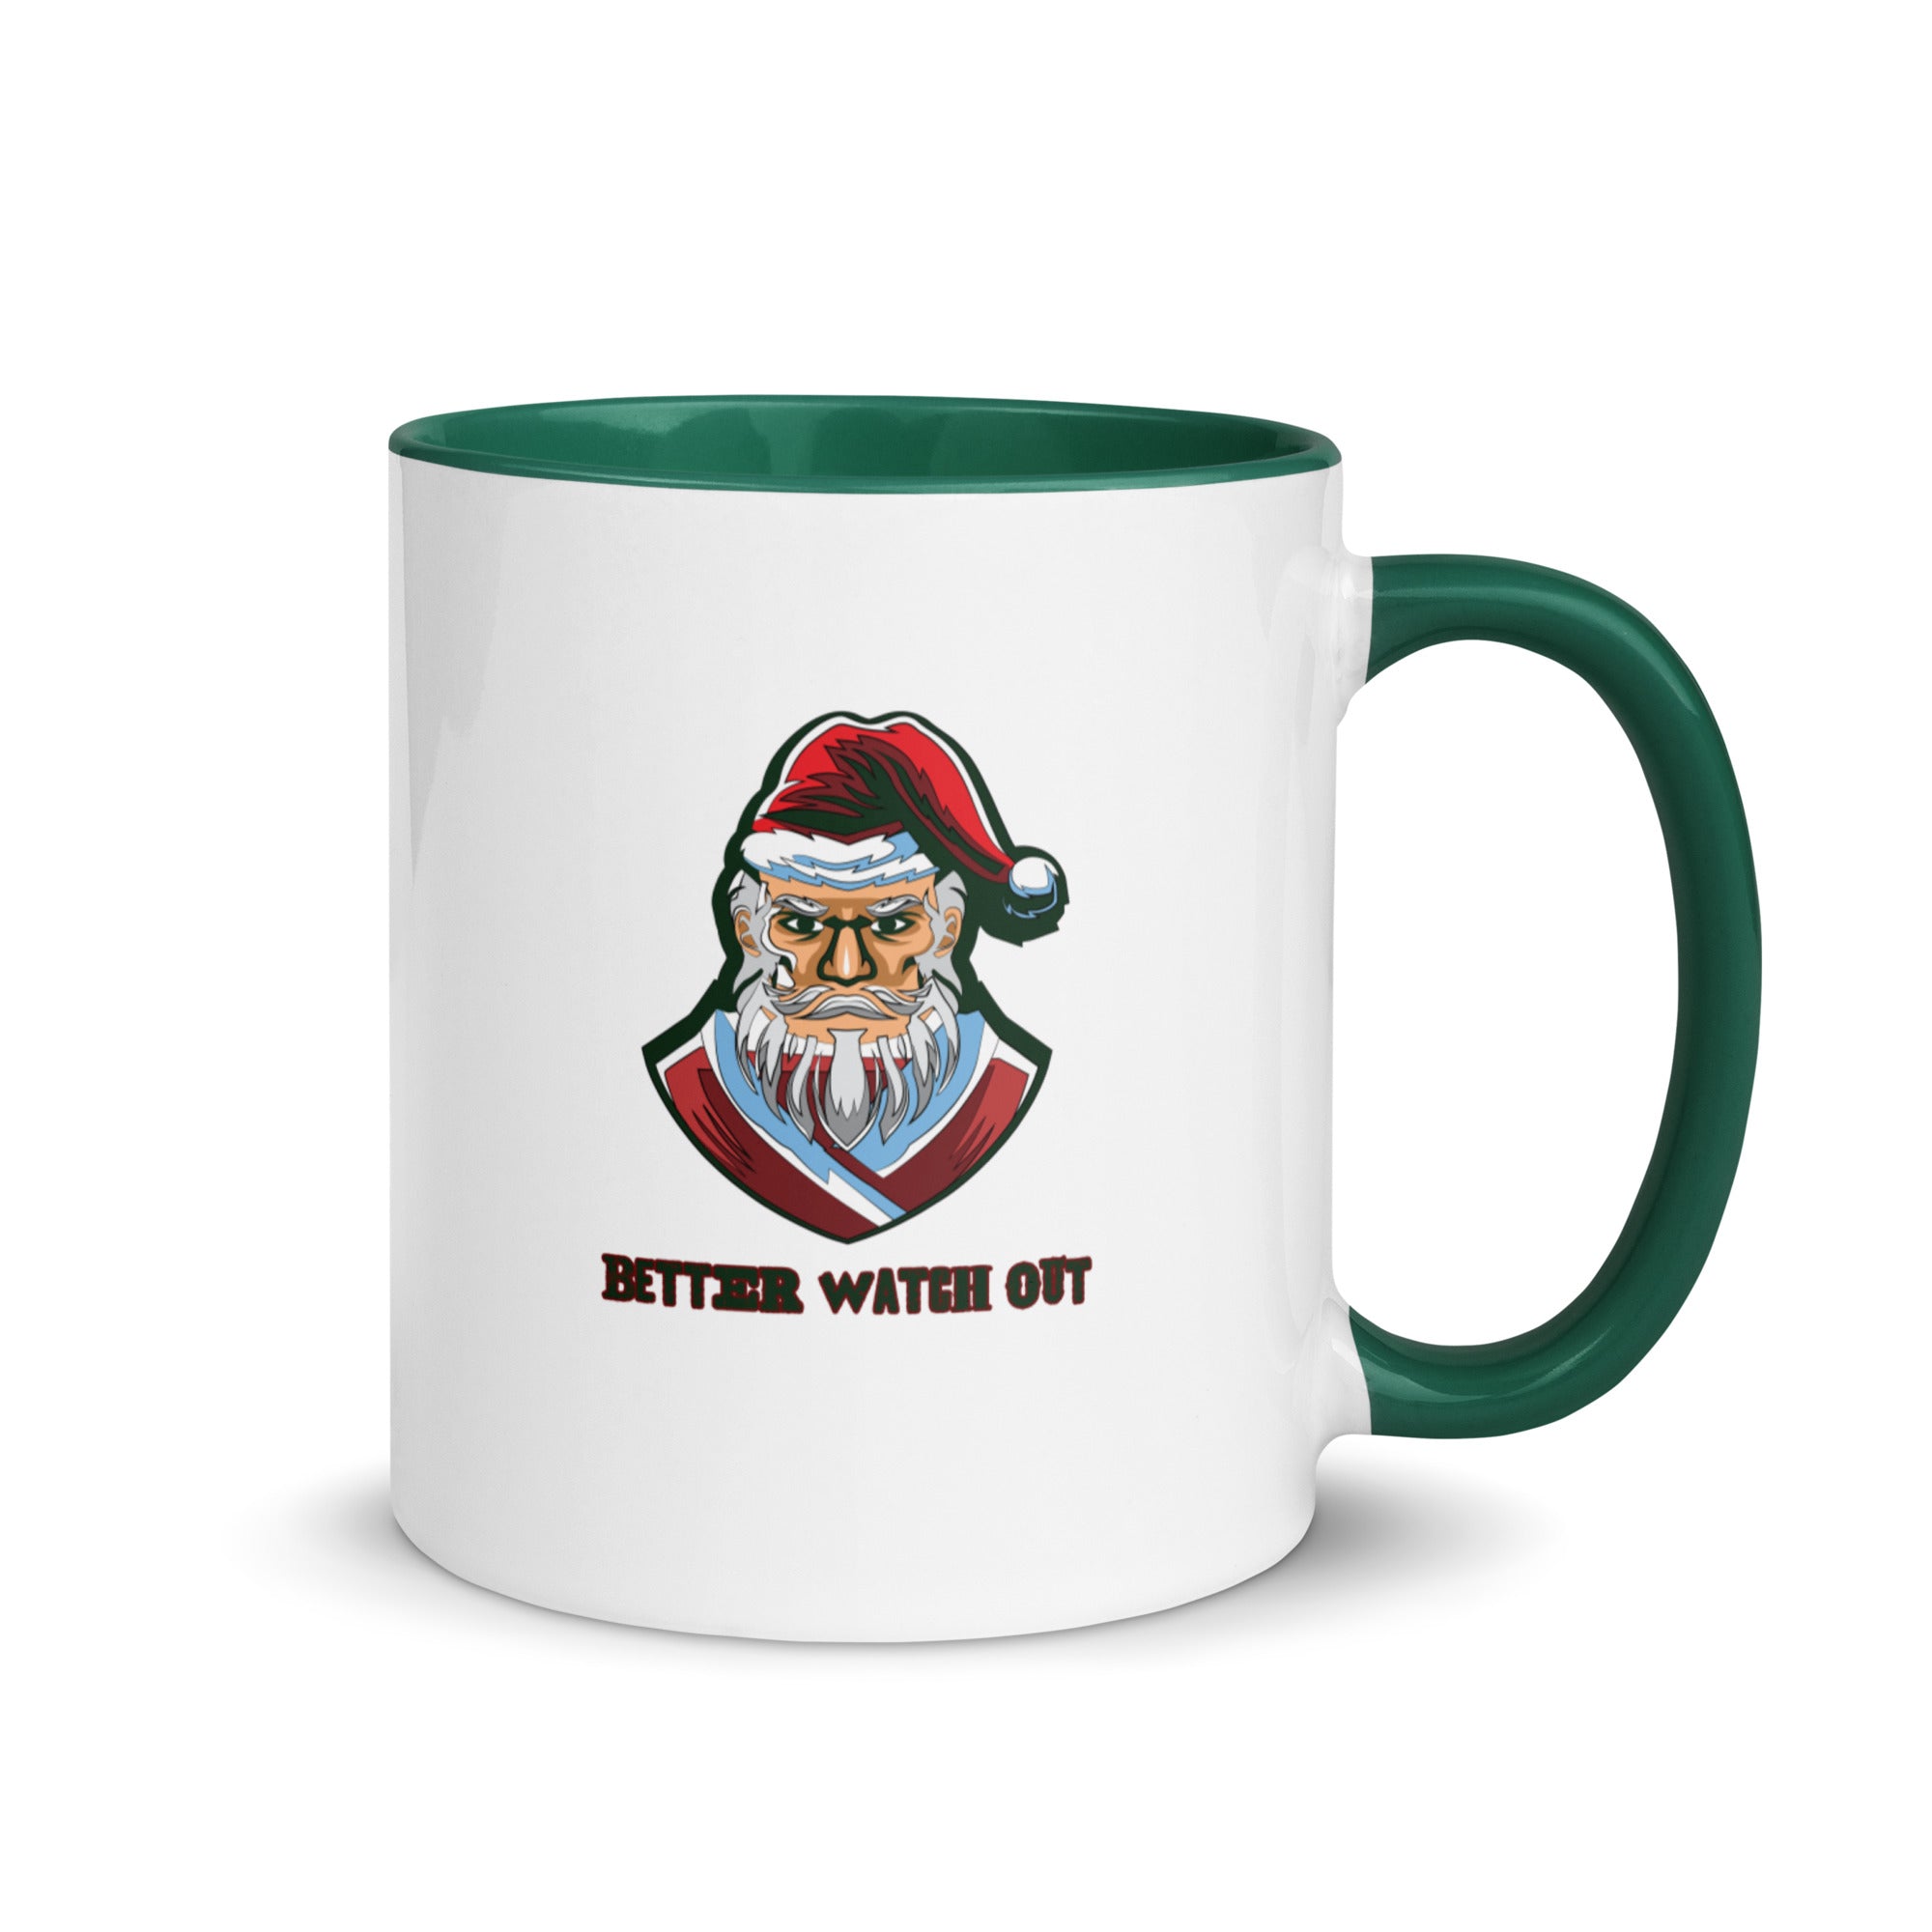 Better Watch Out Mug with Color Inside